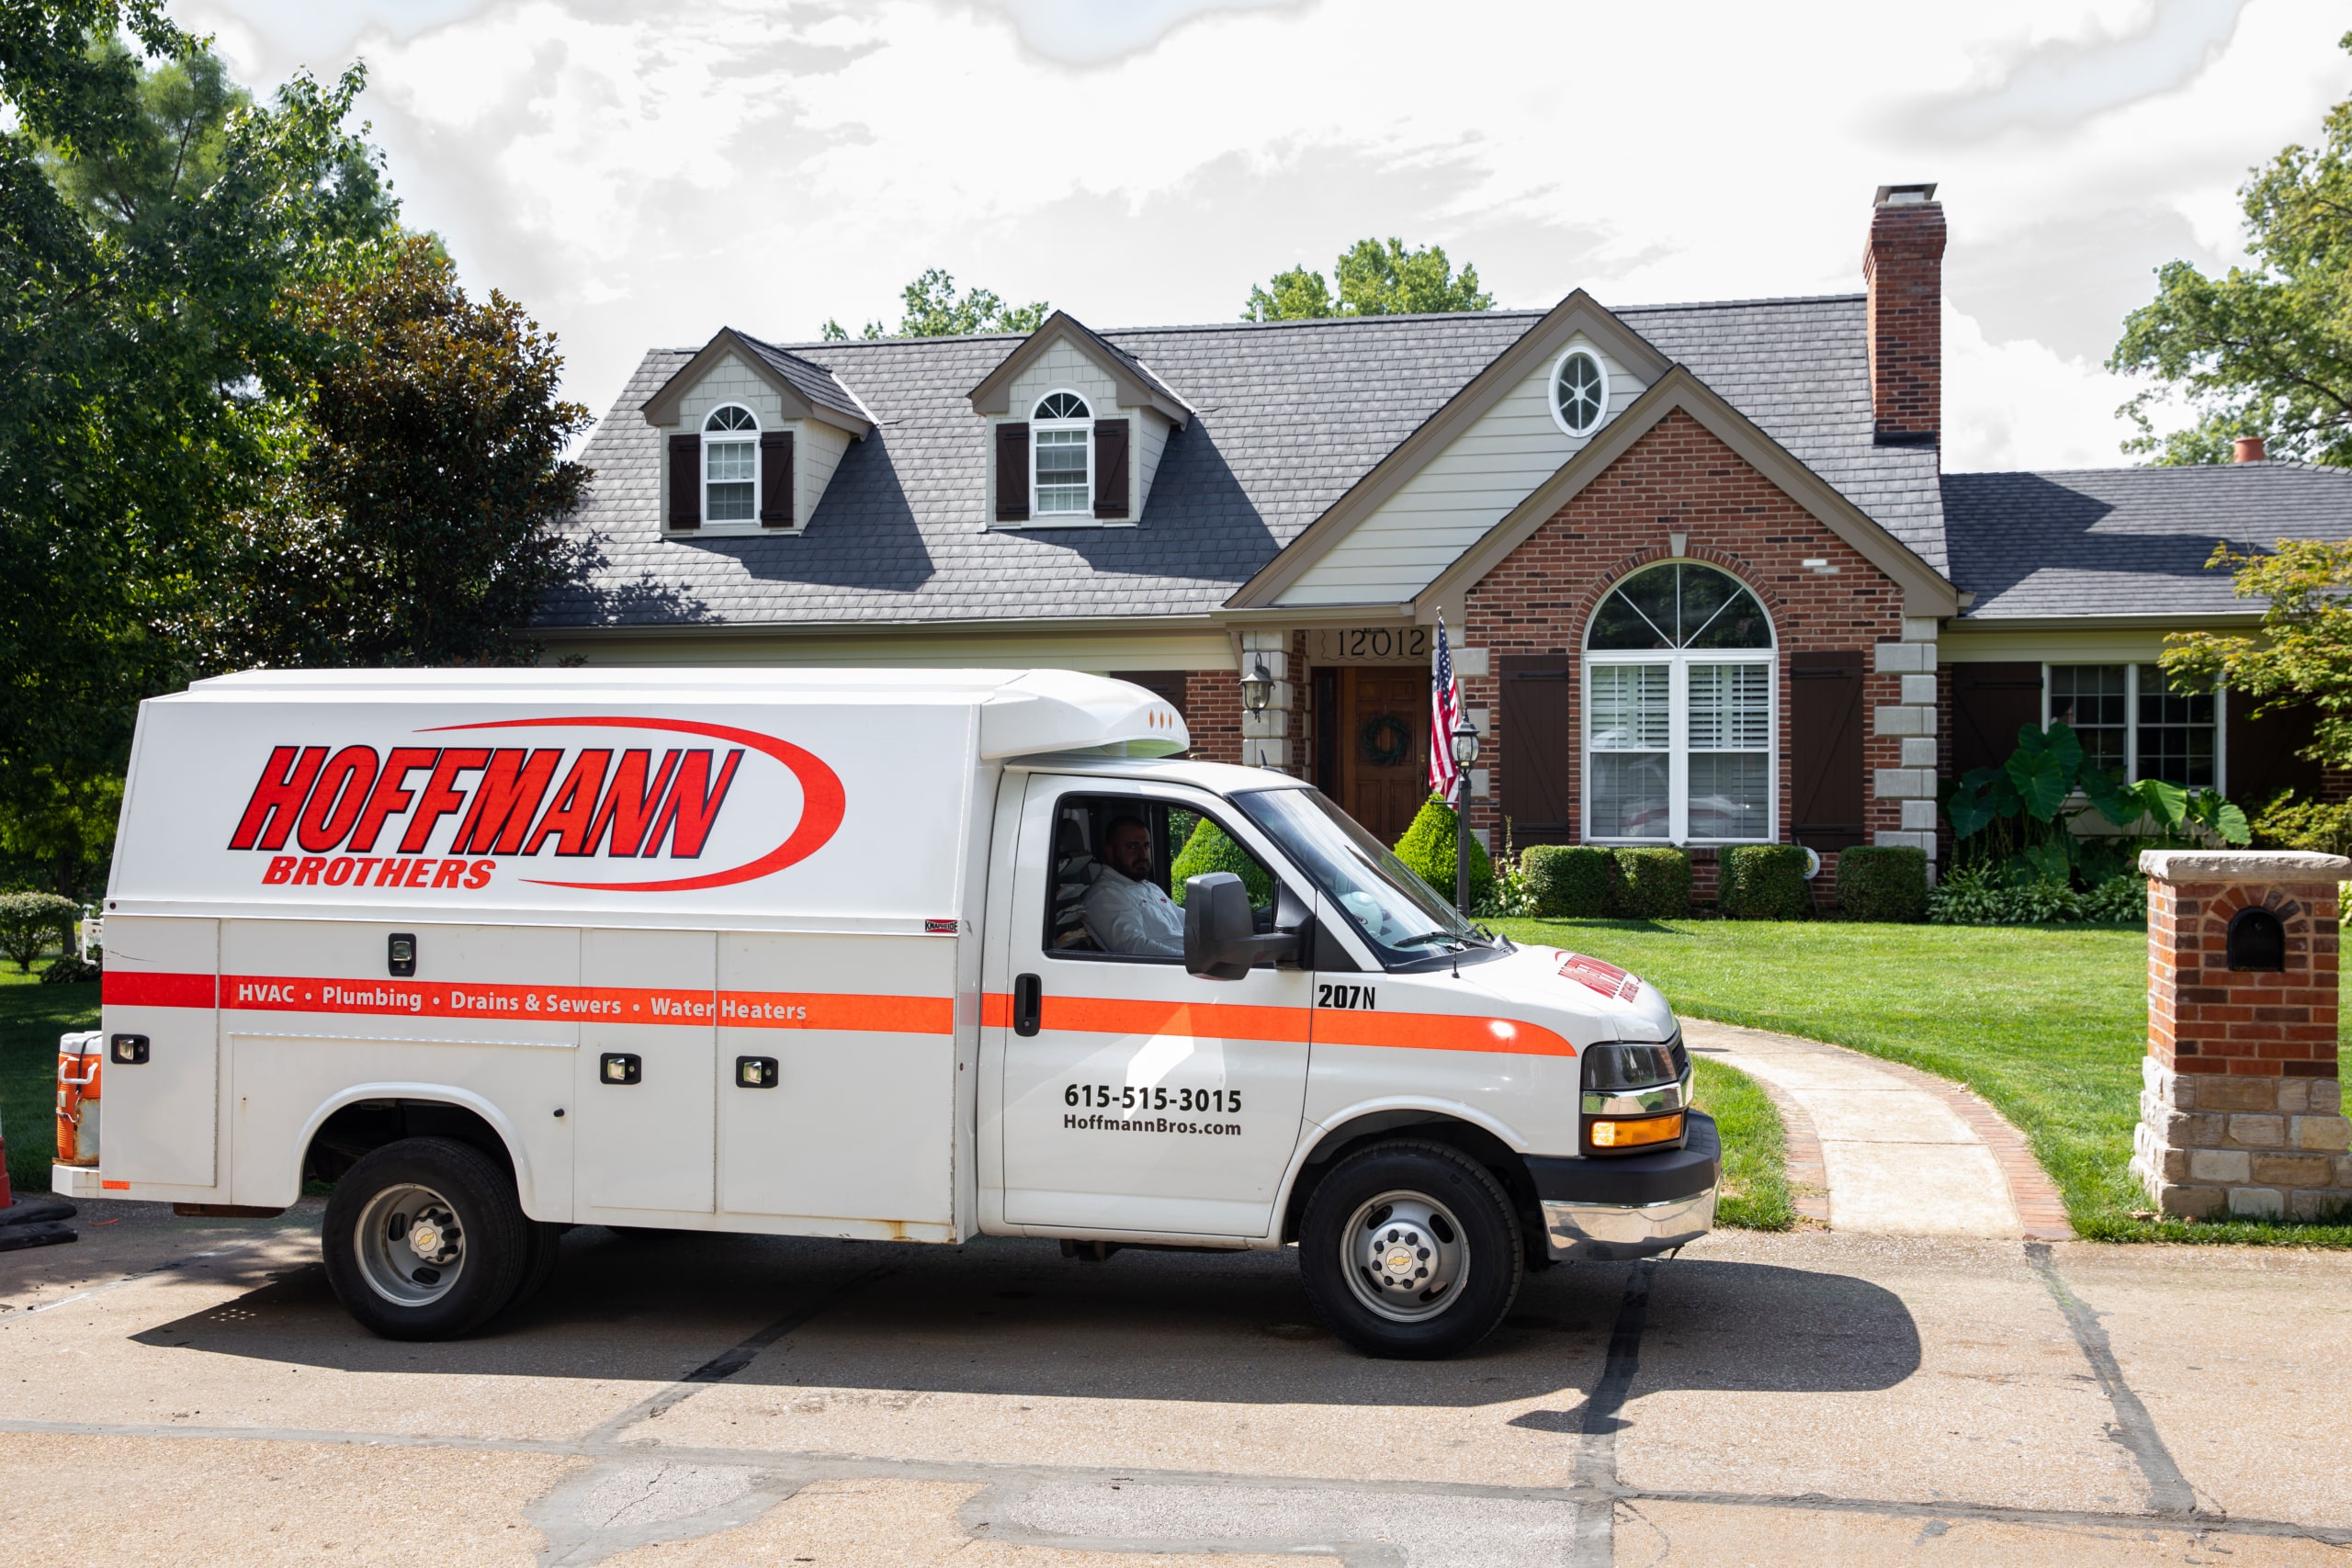 Hoffmann Brothers truck parked outside of a Nashville residence prior to an efficient and timely toilet installation